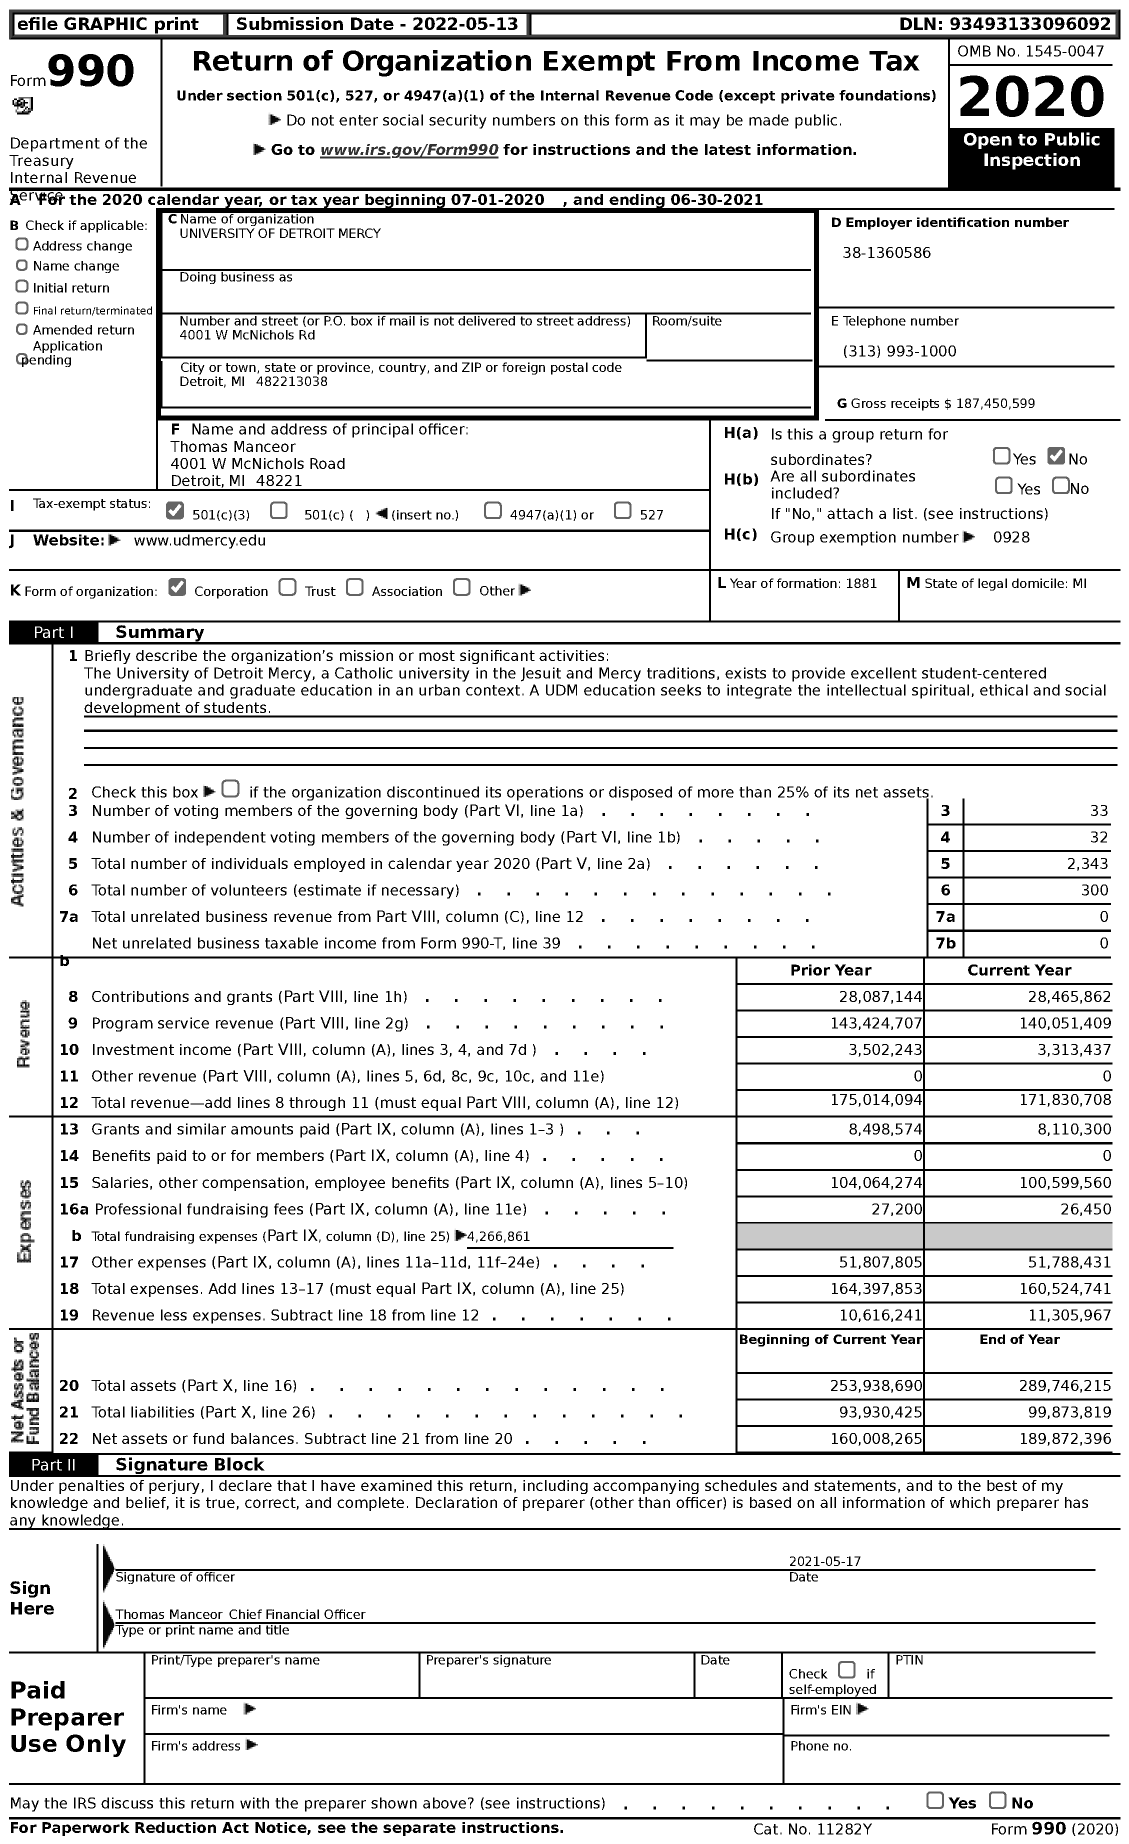 Image of first page of 2020 Form 990 for University of Detroit Mercy (UDM)